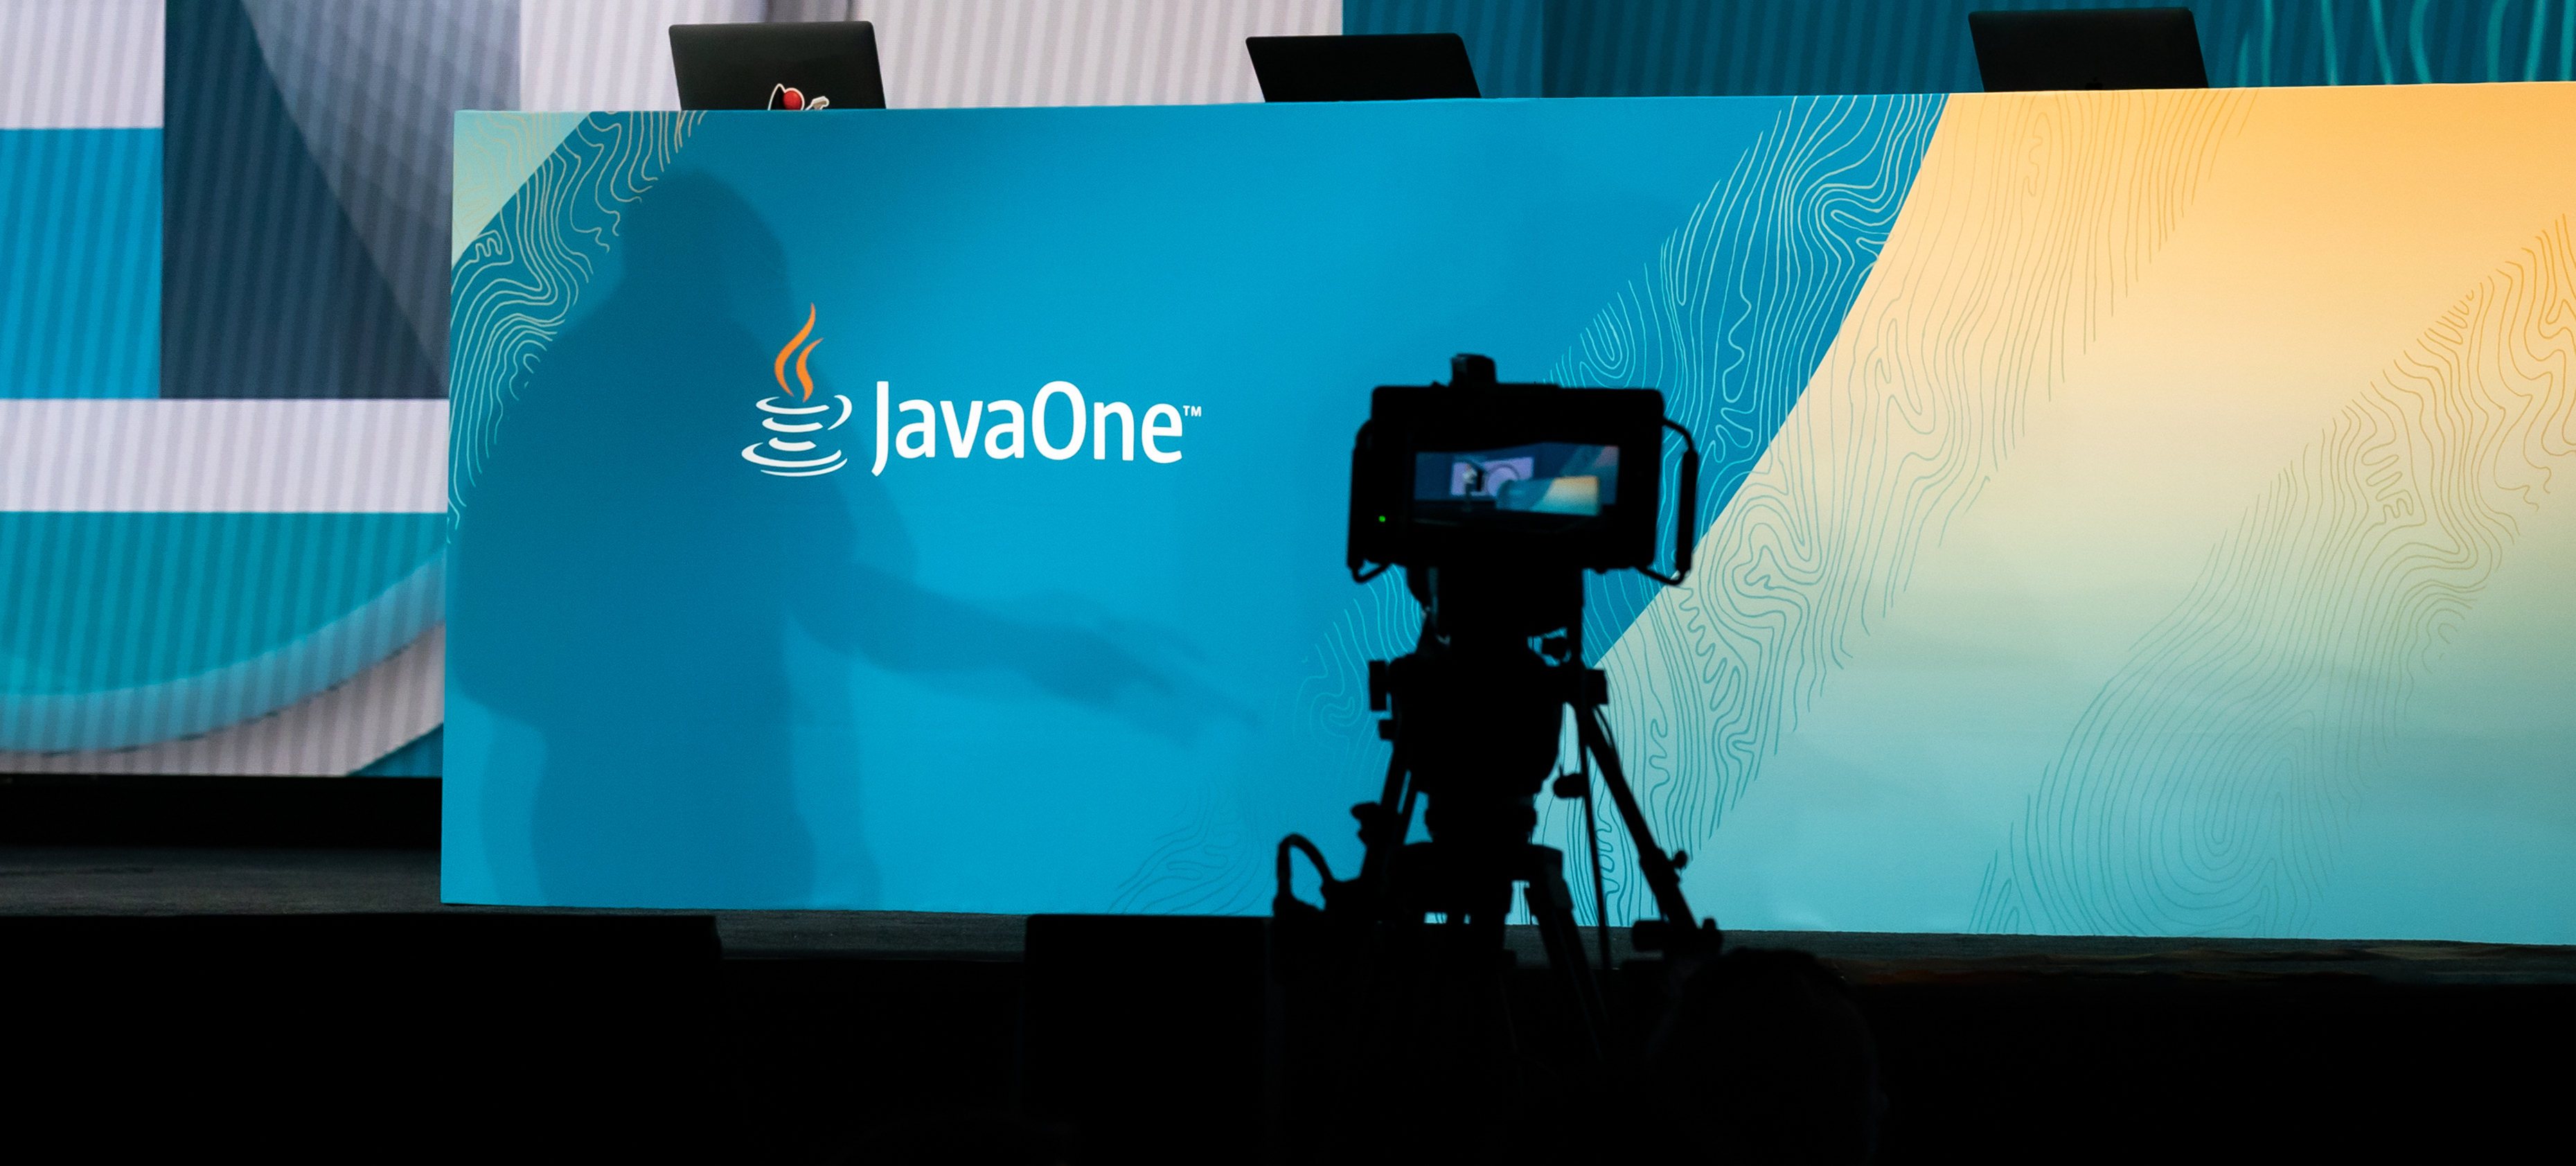 Stage with a JavaOne podium